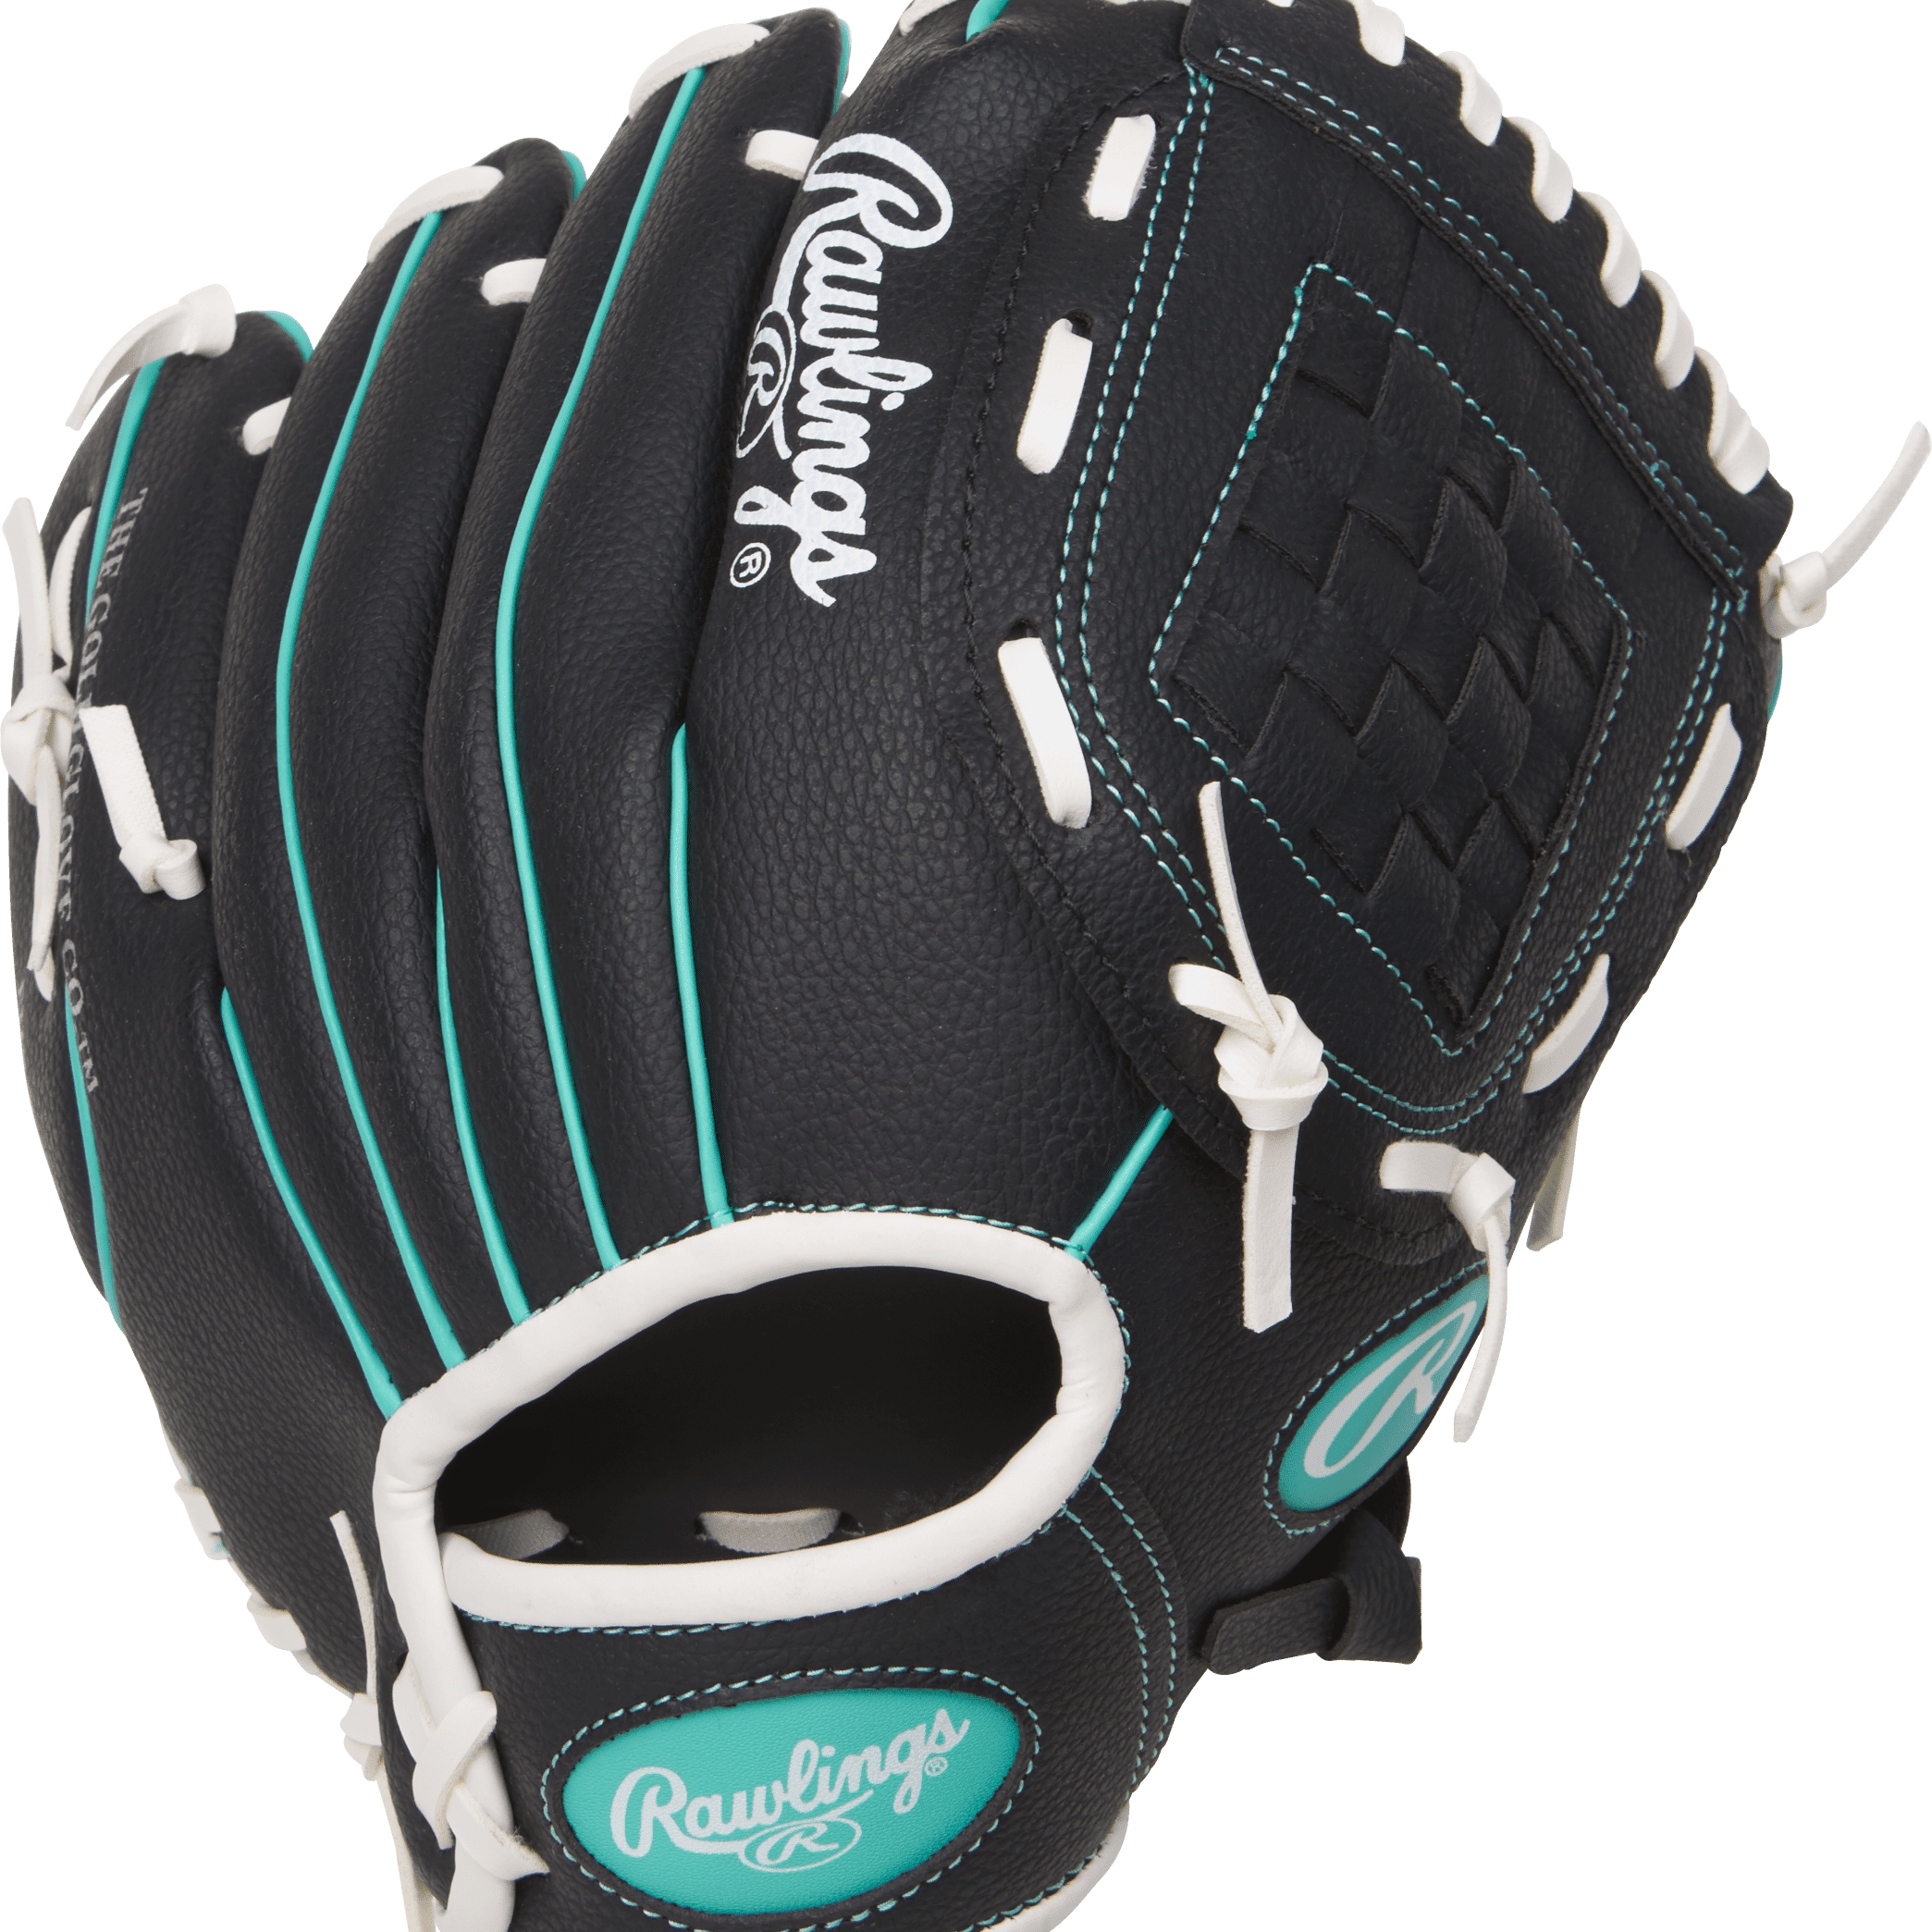 Rawlings Players Series Right Hand Throw Pl105pw 10 1/2" Tball Glove Mitt Ebbh5 for sale online